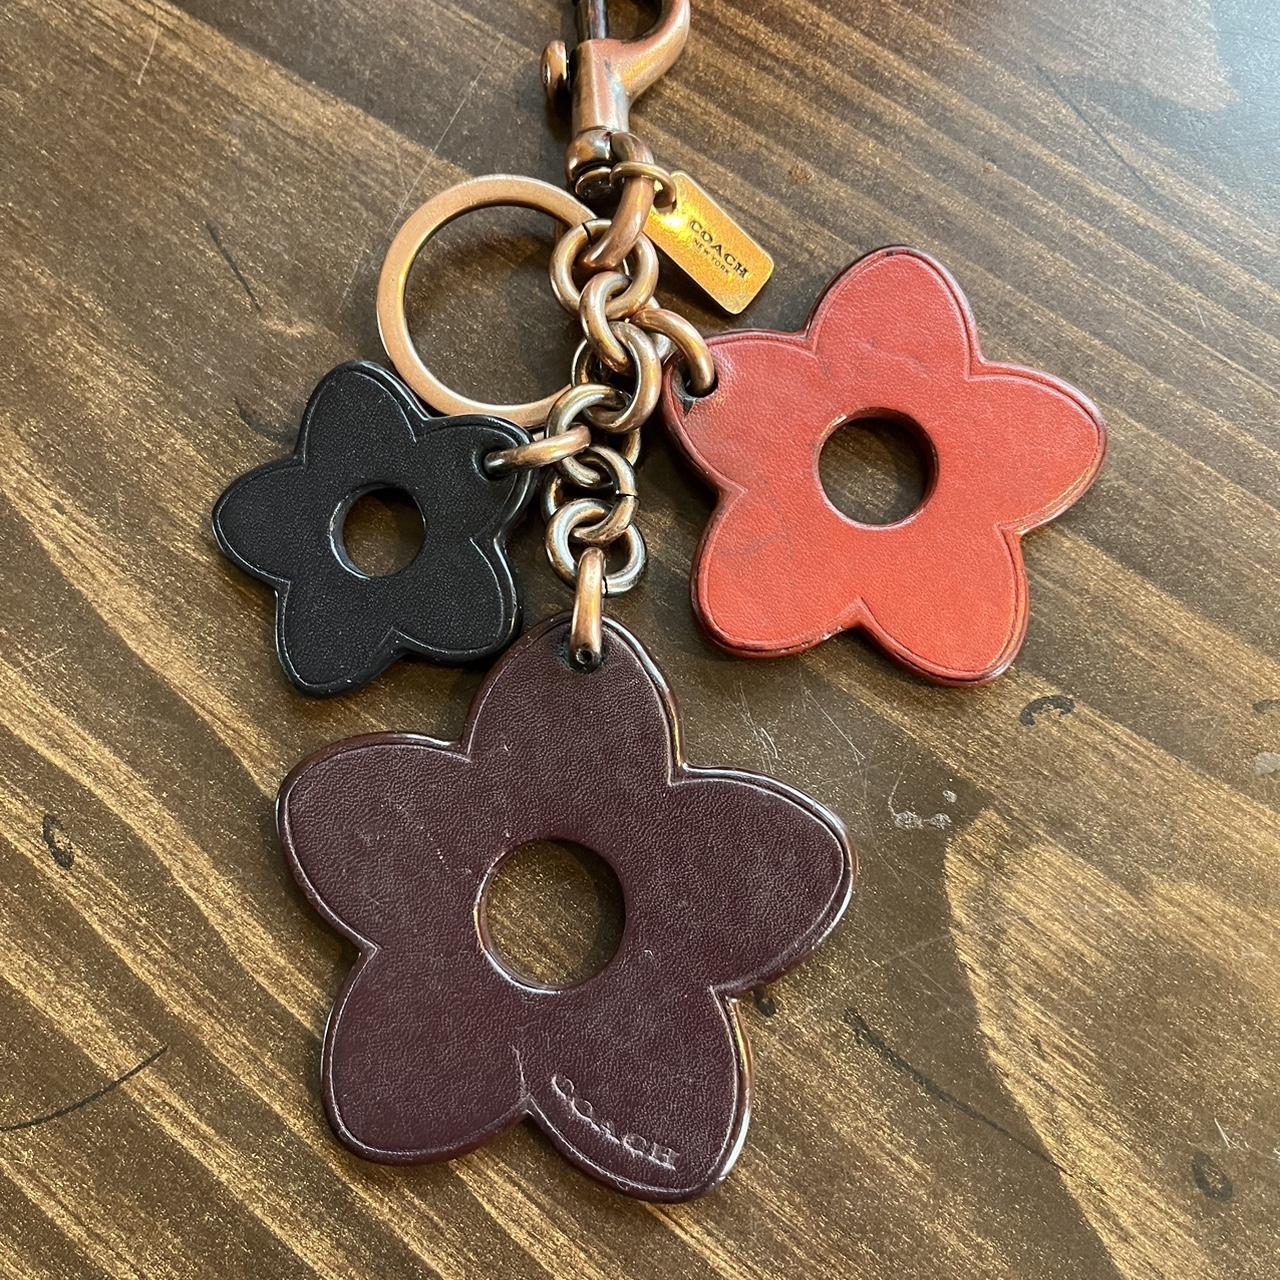 Coach leather flower keychain. This keychain has